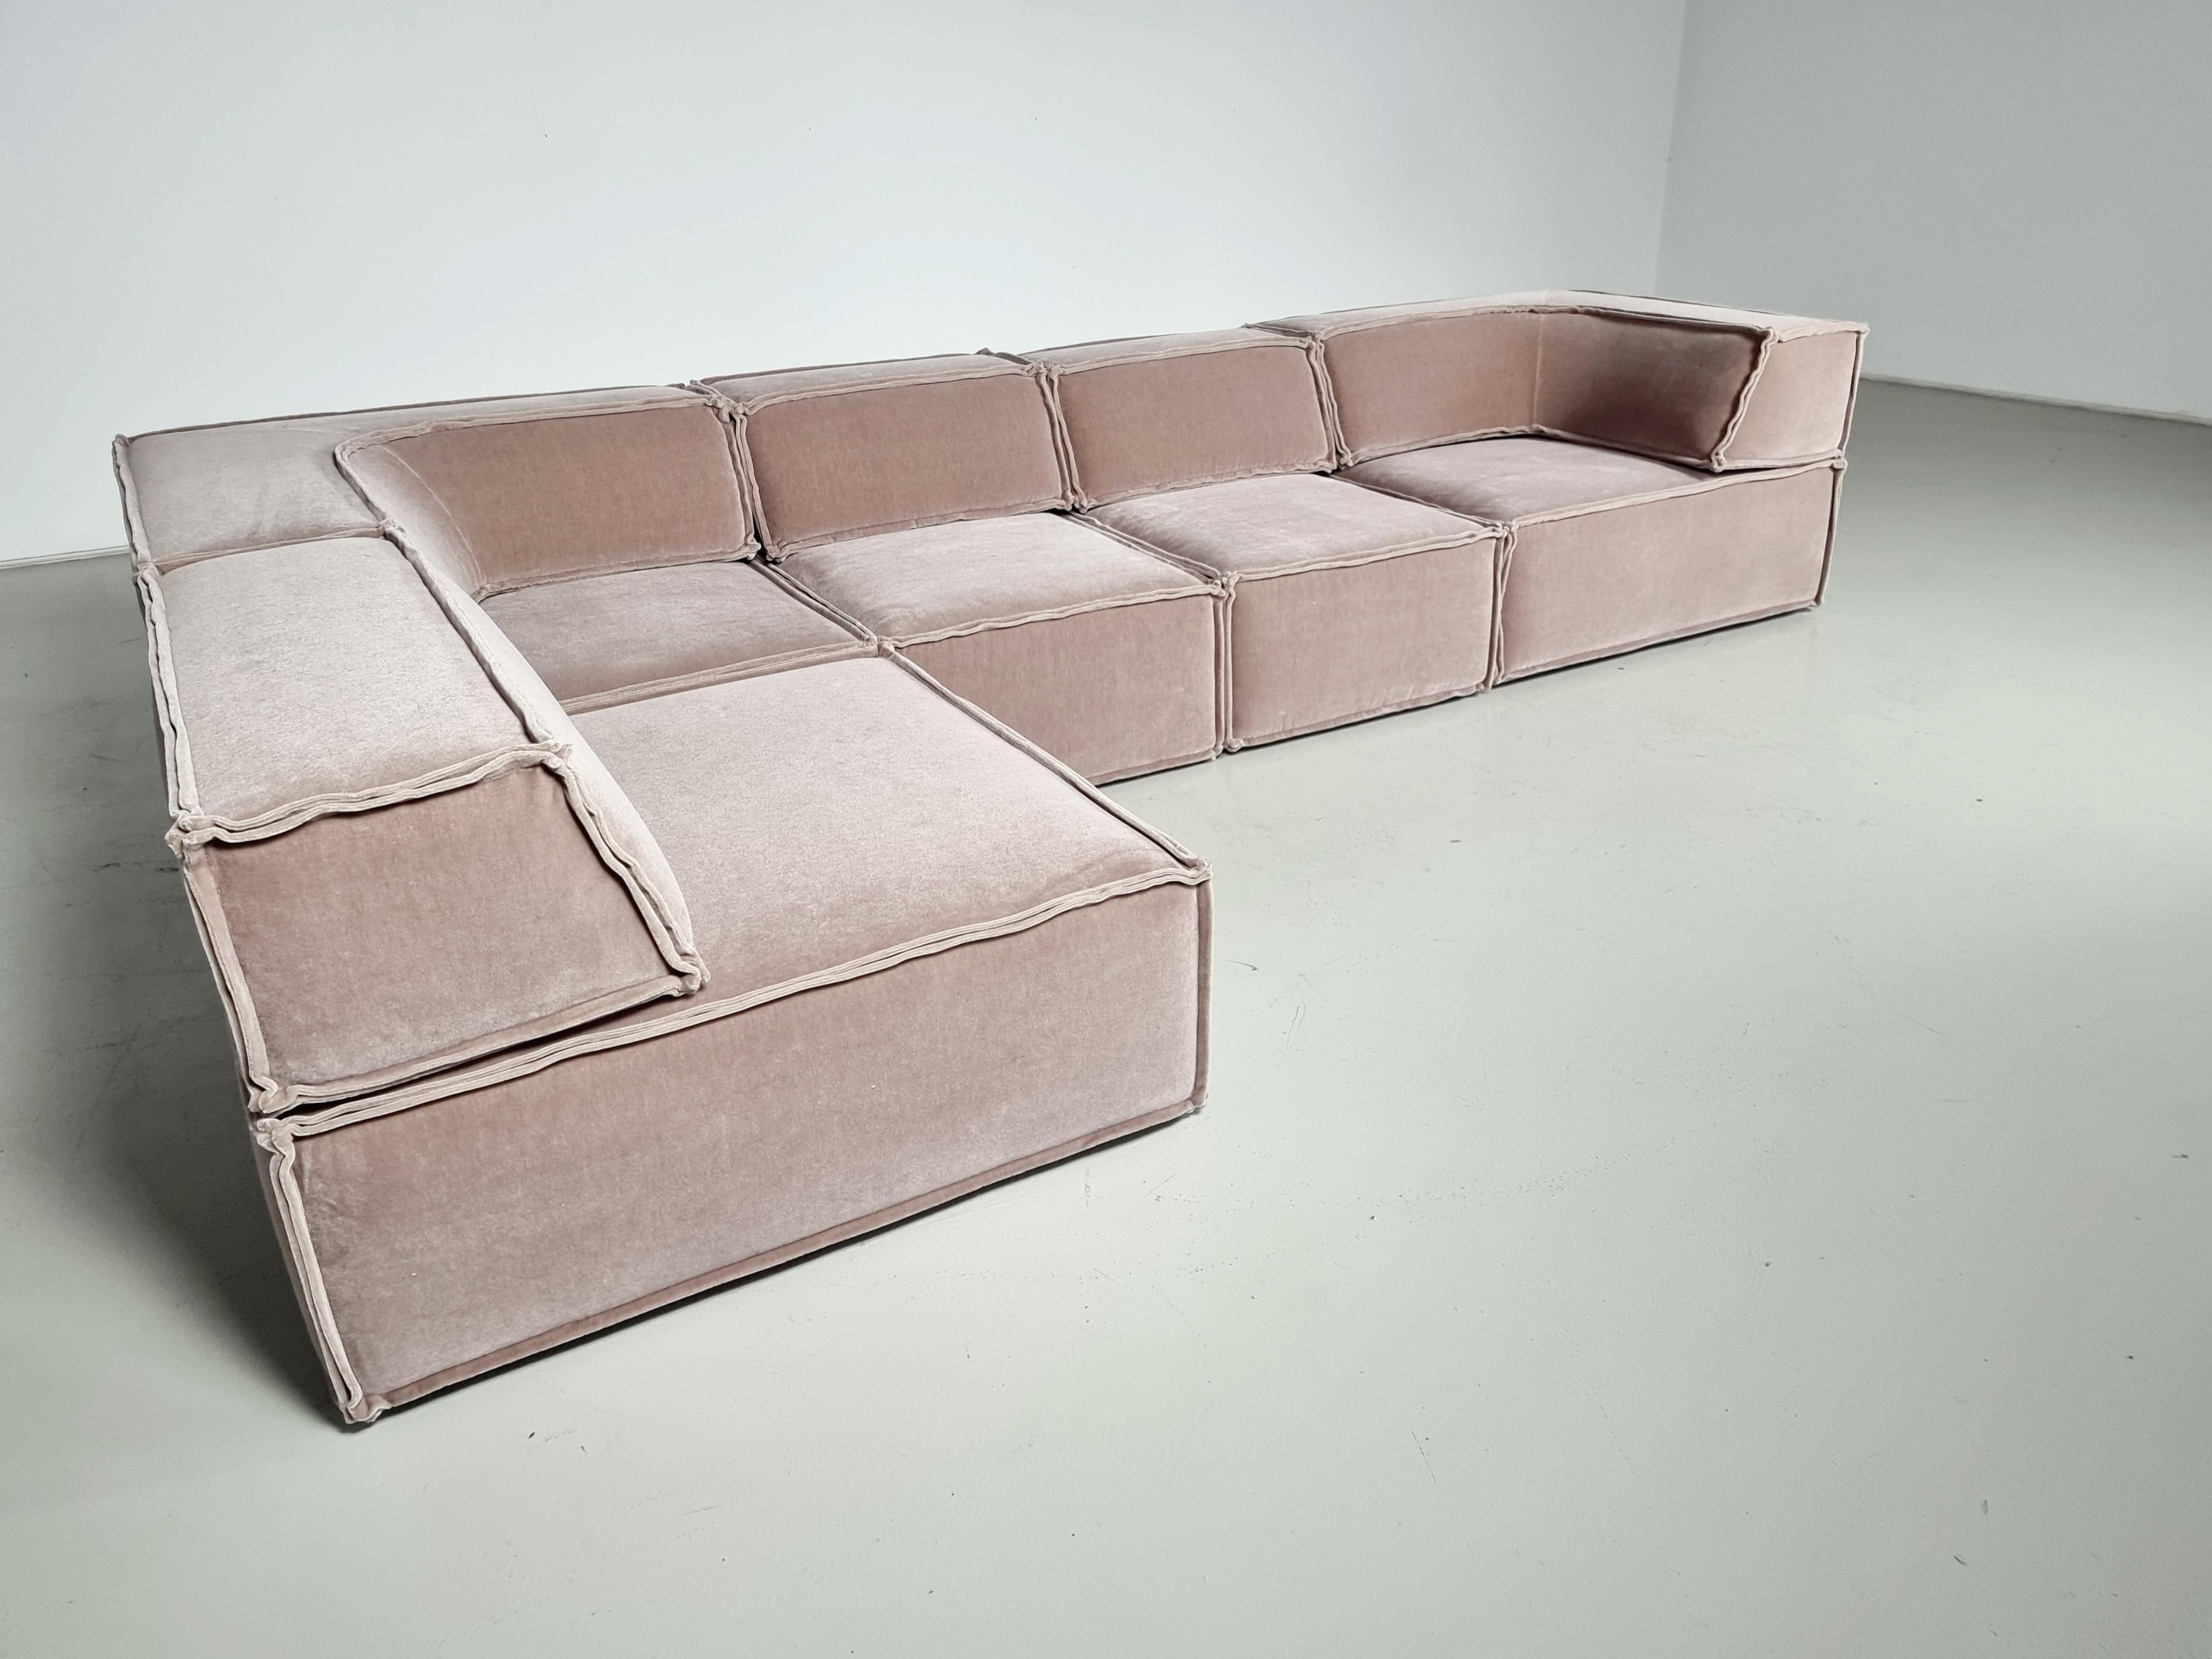 European COR Trio Sofa by Team Form Ag for COR Furniture, Germany, 1970s For Sale